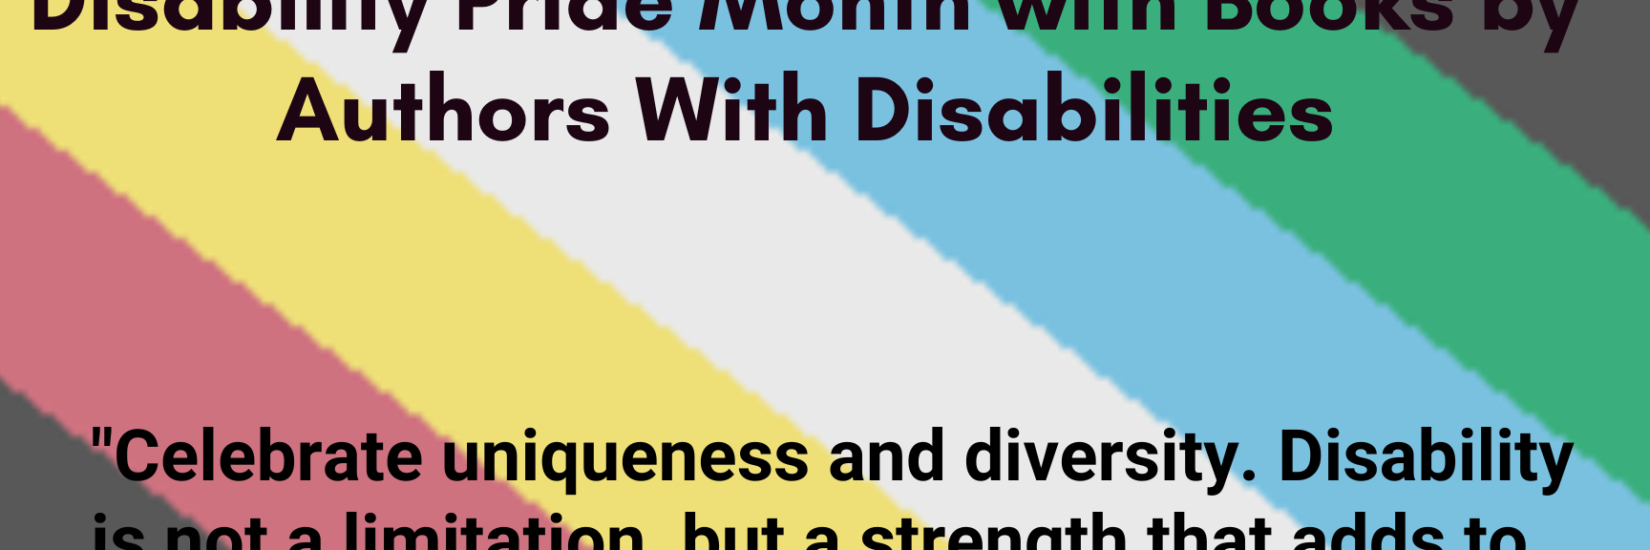 Diversity in Literature: Celebrate Disability Pride Month with Books by Authors With Disabilities